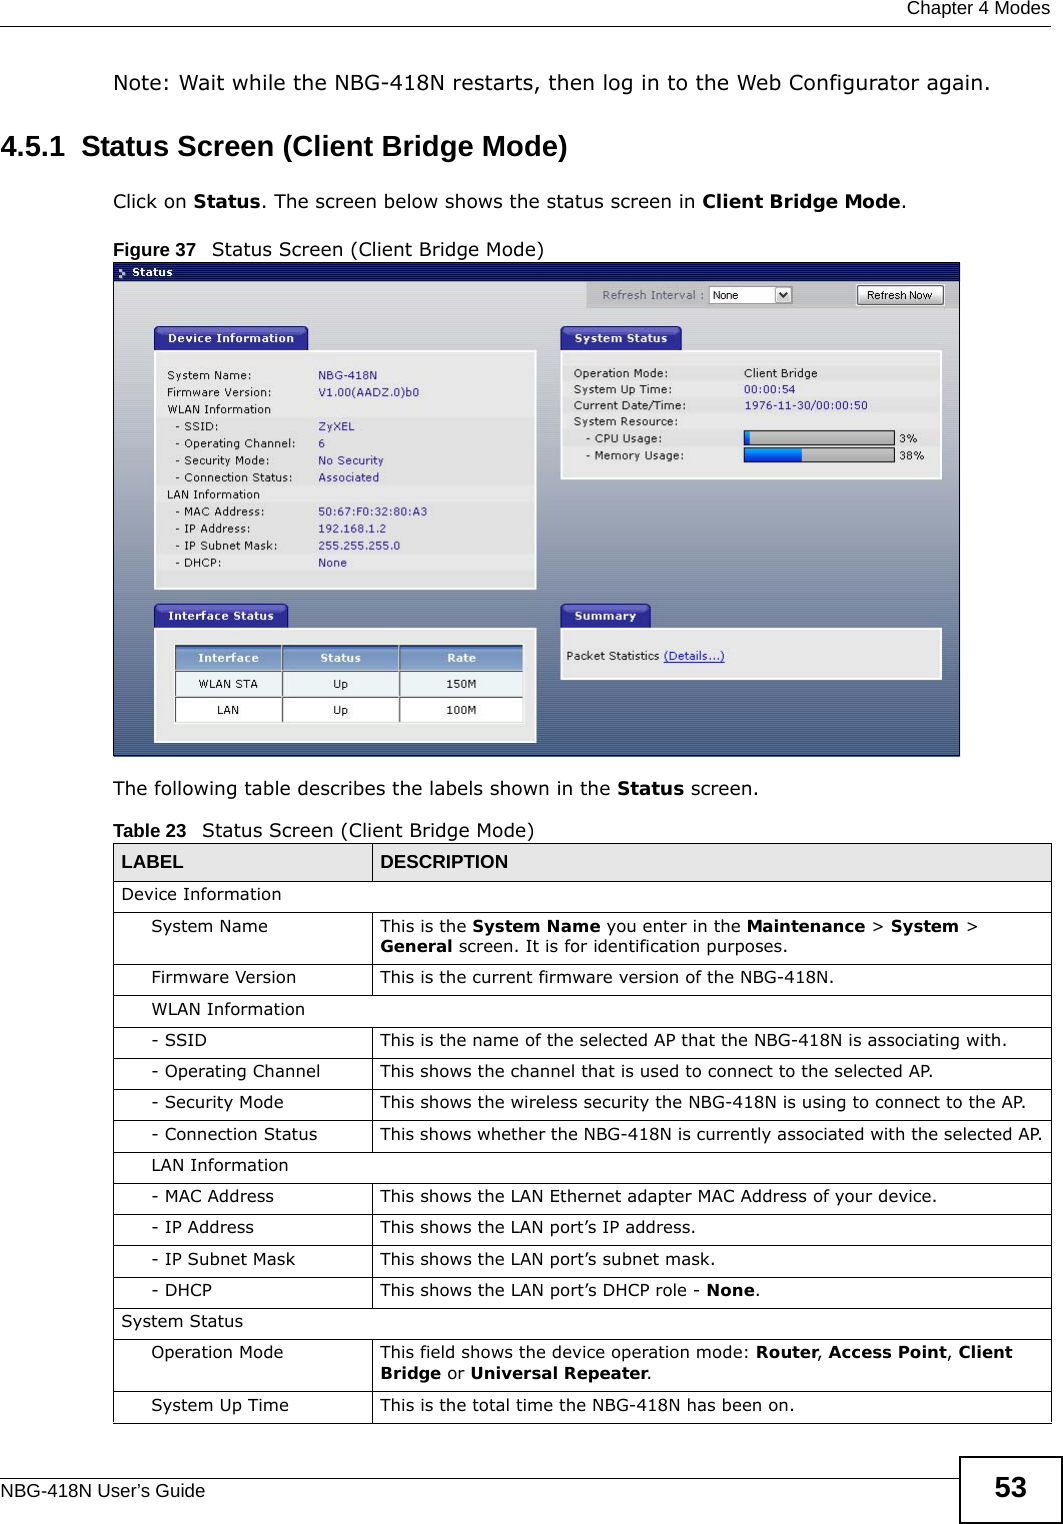  Chapter 4 ModesNBG-418N User’s Guide 53Note: Wait while the NBG-418N restarts, then log in to the Web Configurator again.4.5.1  Status Screen (Client Bridge Mode)Click on Status. The screen below shows the status screen in Client Bridge Mode. Figure 37   Status Screen (Client Bridge Mode) The following table describes the labels shown in the Status screen.Table 23   Status Screen (Client Bridge Mode)LABEL DESCRIPTIONDevice InformationSystem Name This is the System Name you enter in the Maintenance &gt; System &gt; General screen. It is for identification purposes.Firmware Version This is the current firmware version of the NBG-418N. WLAN Information- SSID This is the name of the selected AP that the NBG-418N is associating with. - Operating Channel This shows the channel that is used to connect to the selected AP.- Security Mode This shows the wireless security the NBG-418N is using to connect to the AP.- Connection Status This shows whether the NBG-418N is currently associated with the selected AP.LAN Information- MAC Address This shows the LAN Ethernet adapter MAC Address of your device.- IP Address This shows the LAN port’s IP address.- IP Subnet Mask This shows the LAN port’s subnet mask.- DHCP This shows the LAN port’s DHCP role - None.System StatusOperation Mode This field shows the device operation mode: Router, Access Point, Client Bridge or Universal Repeater.System Up Time This is the total time the NBG-418N has been on.